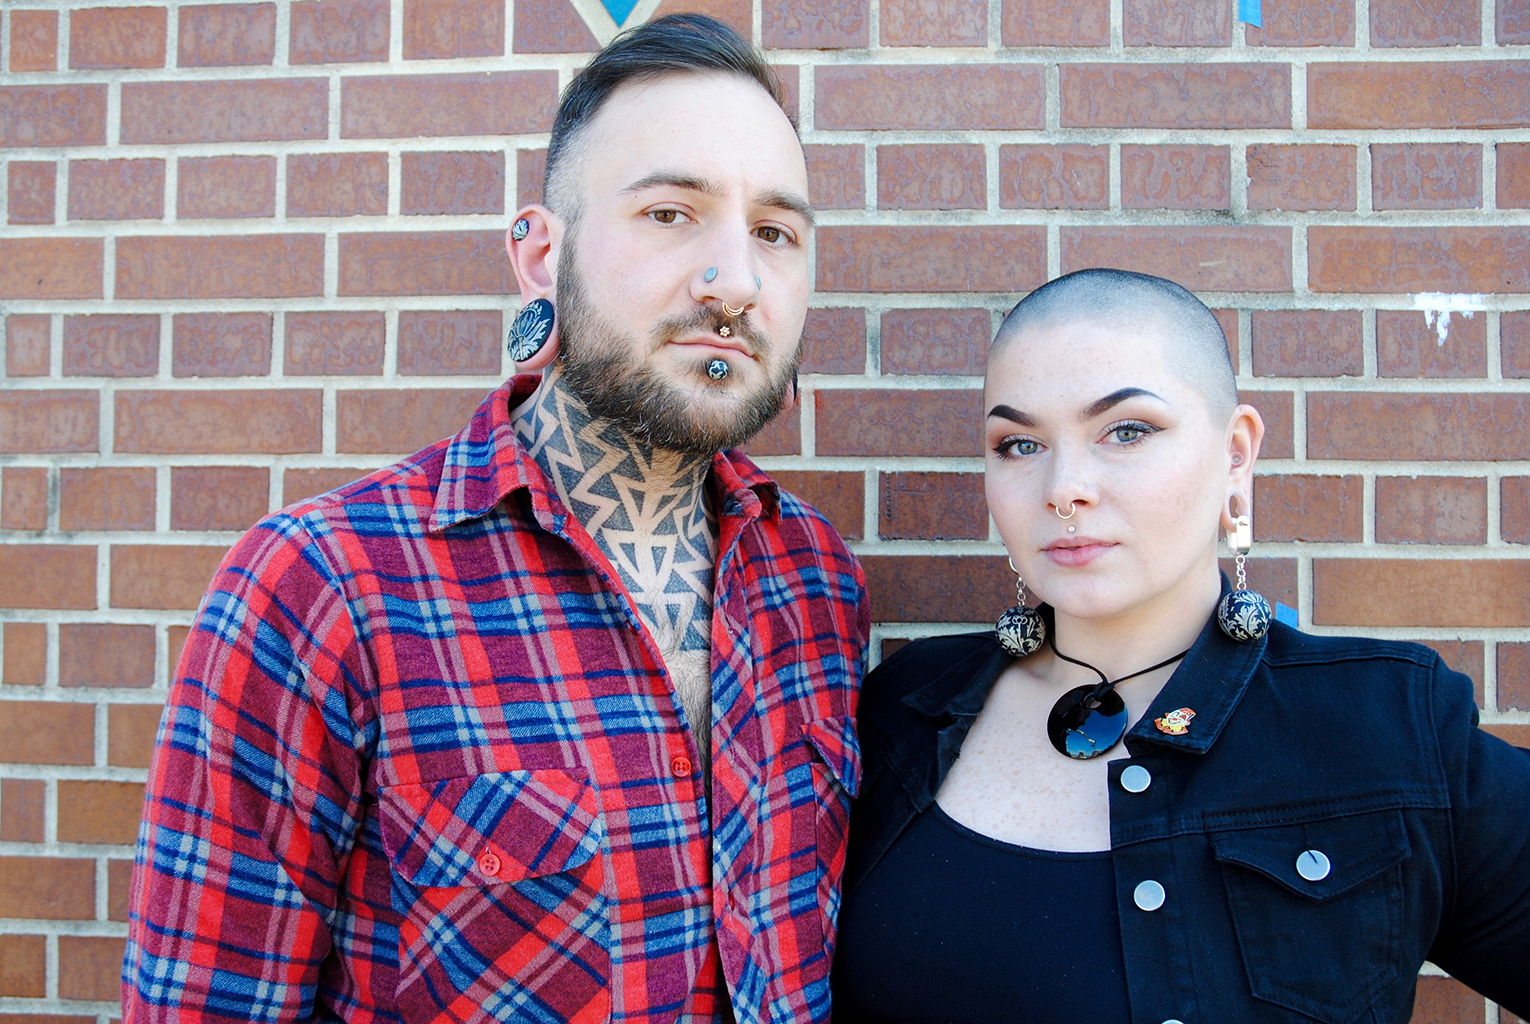 Andru Rogge and Haley Davena photographed for Infinite Body Piercing